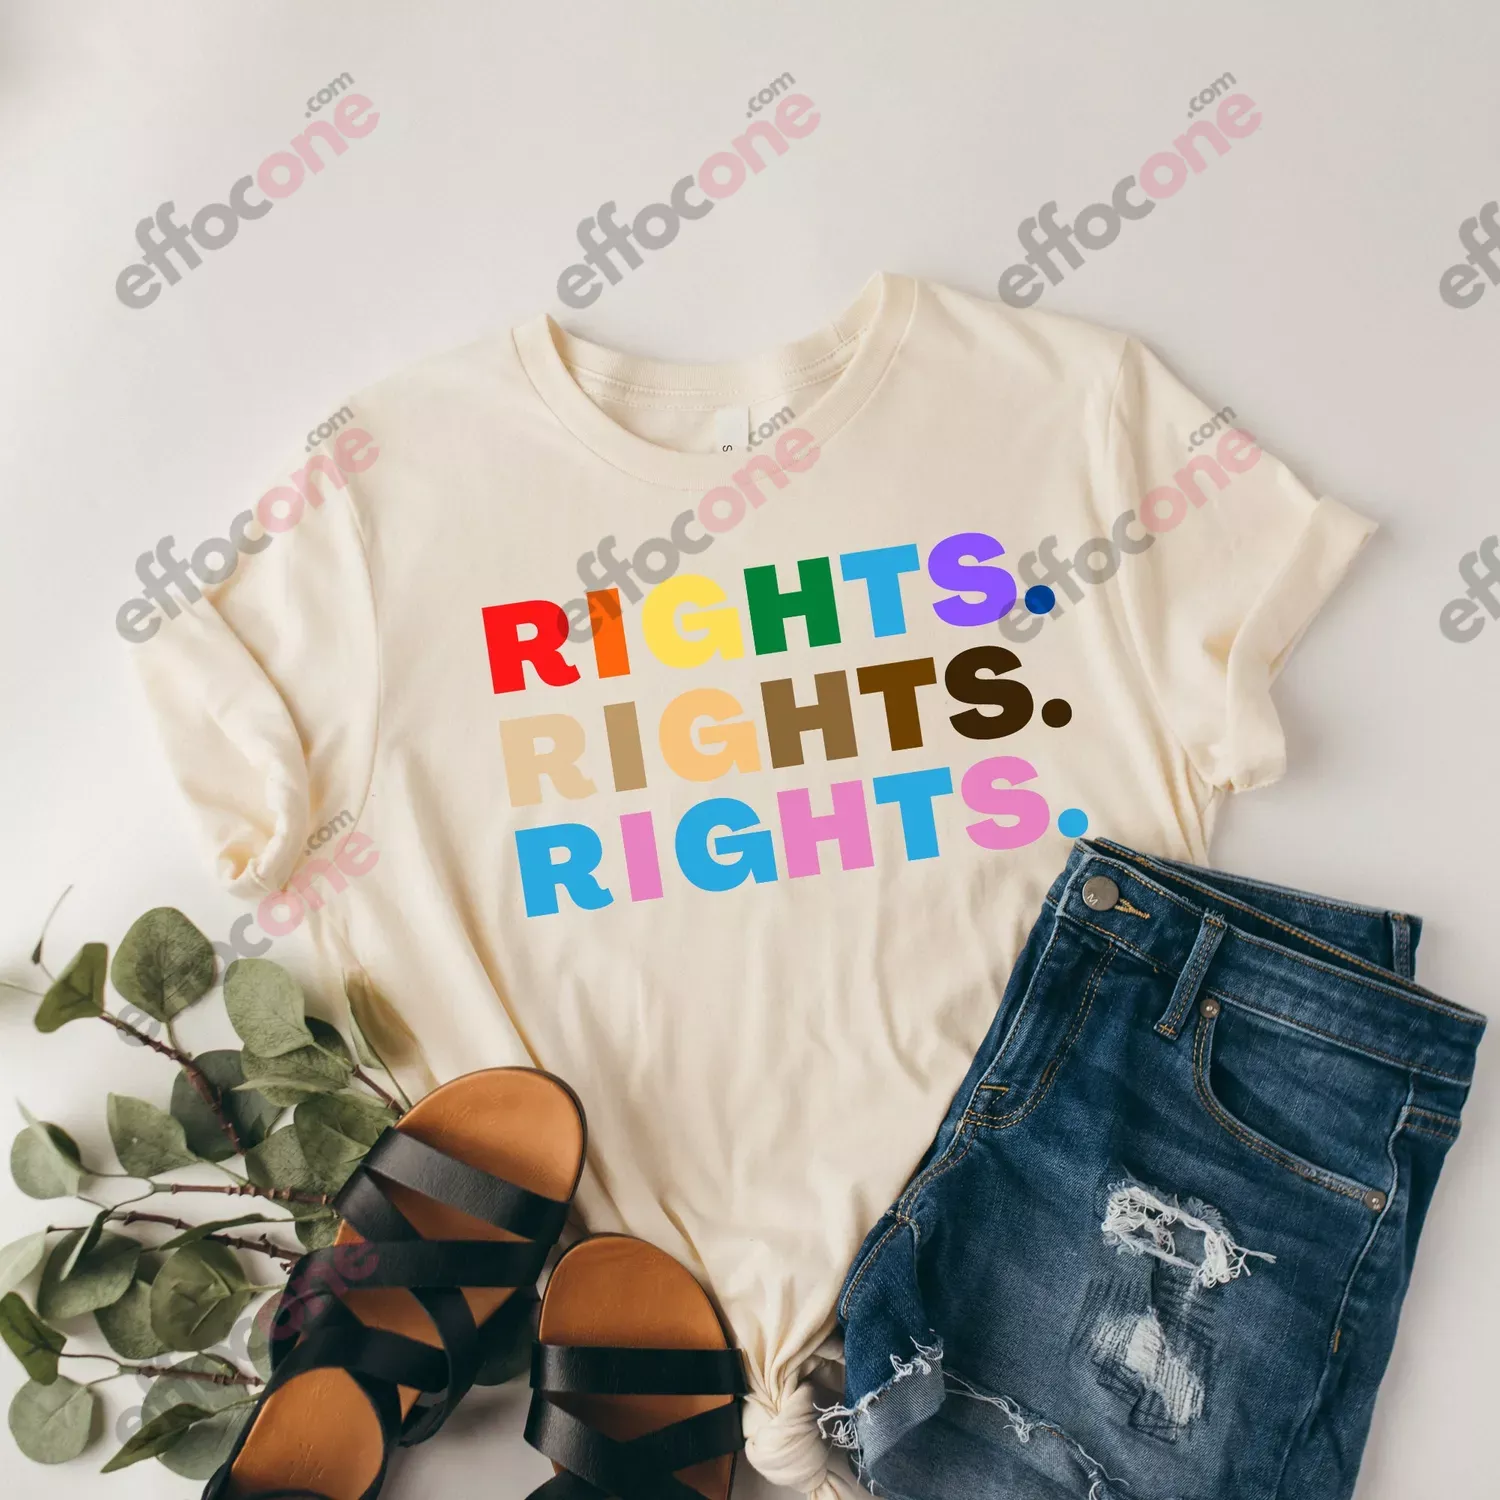 Pride Rights BLM Rights-lgbt rights